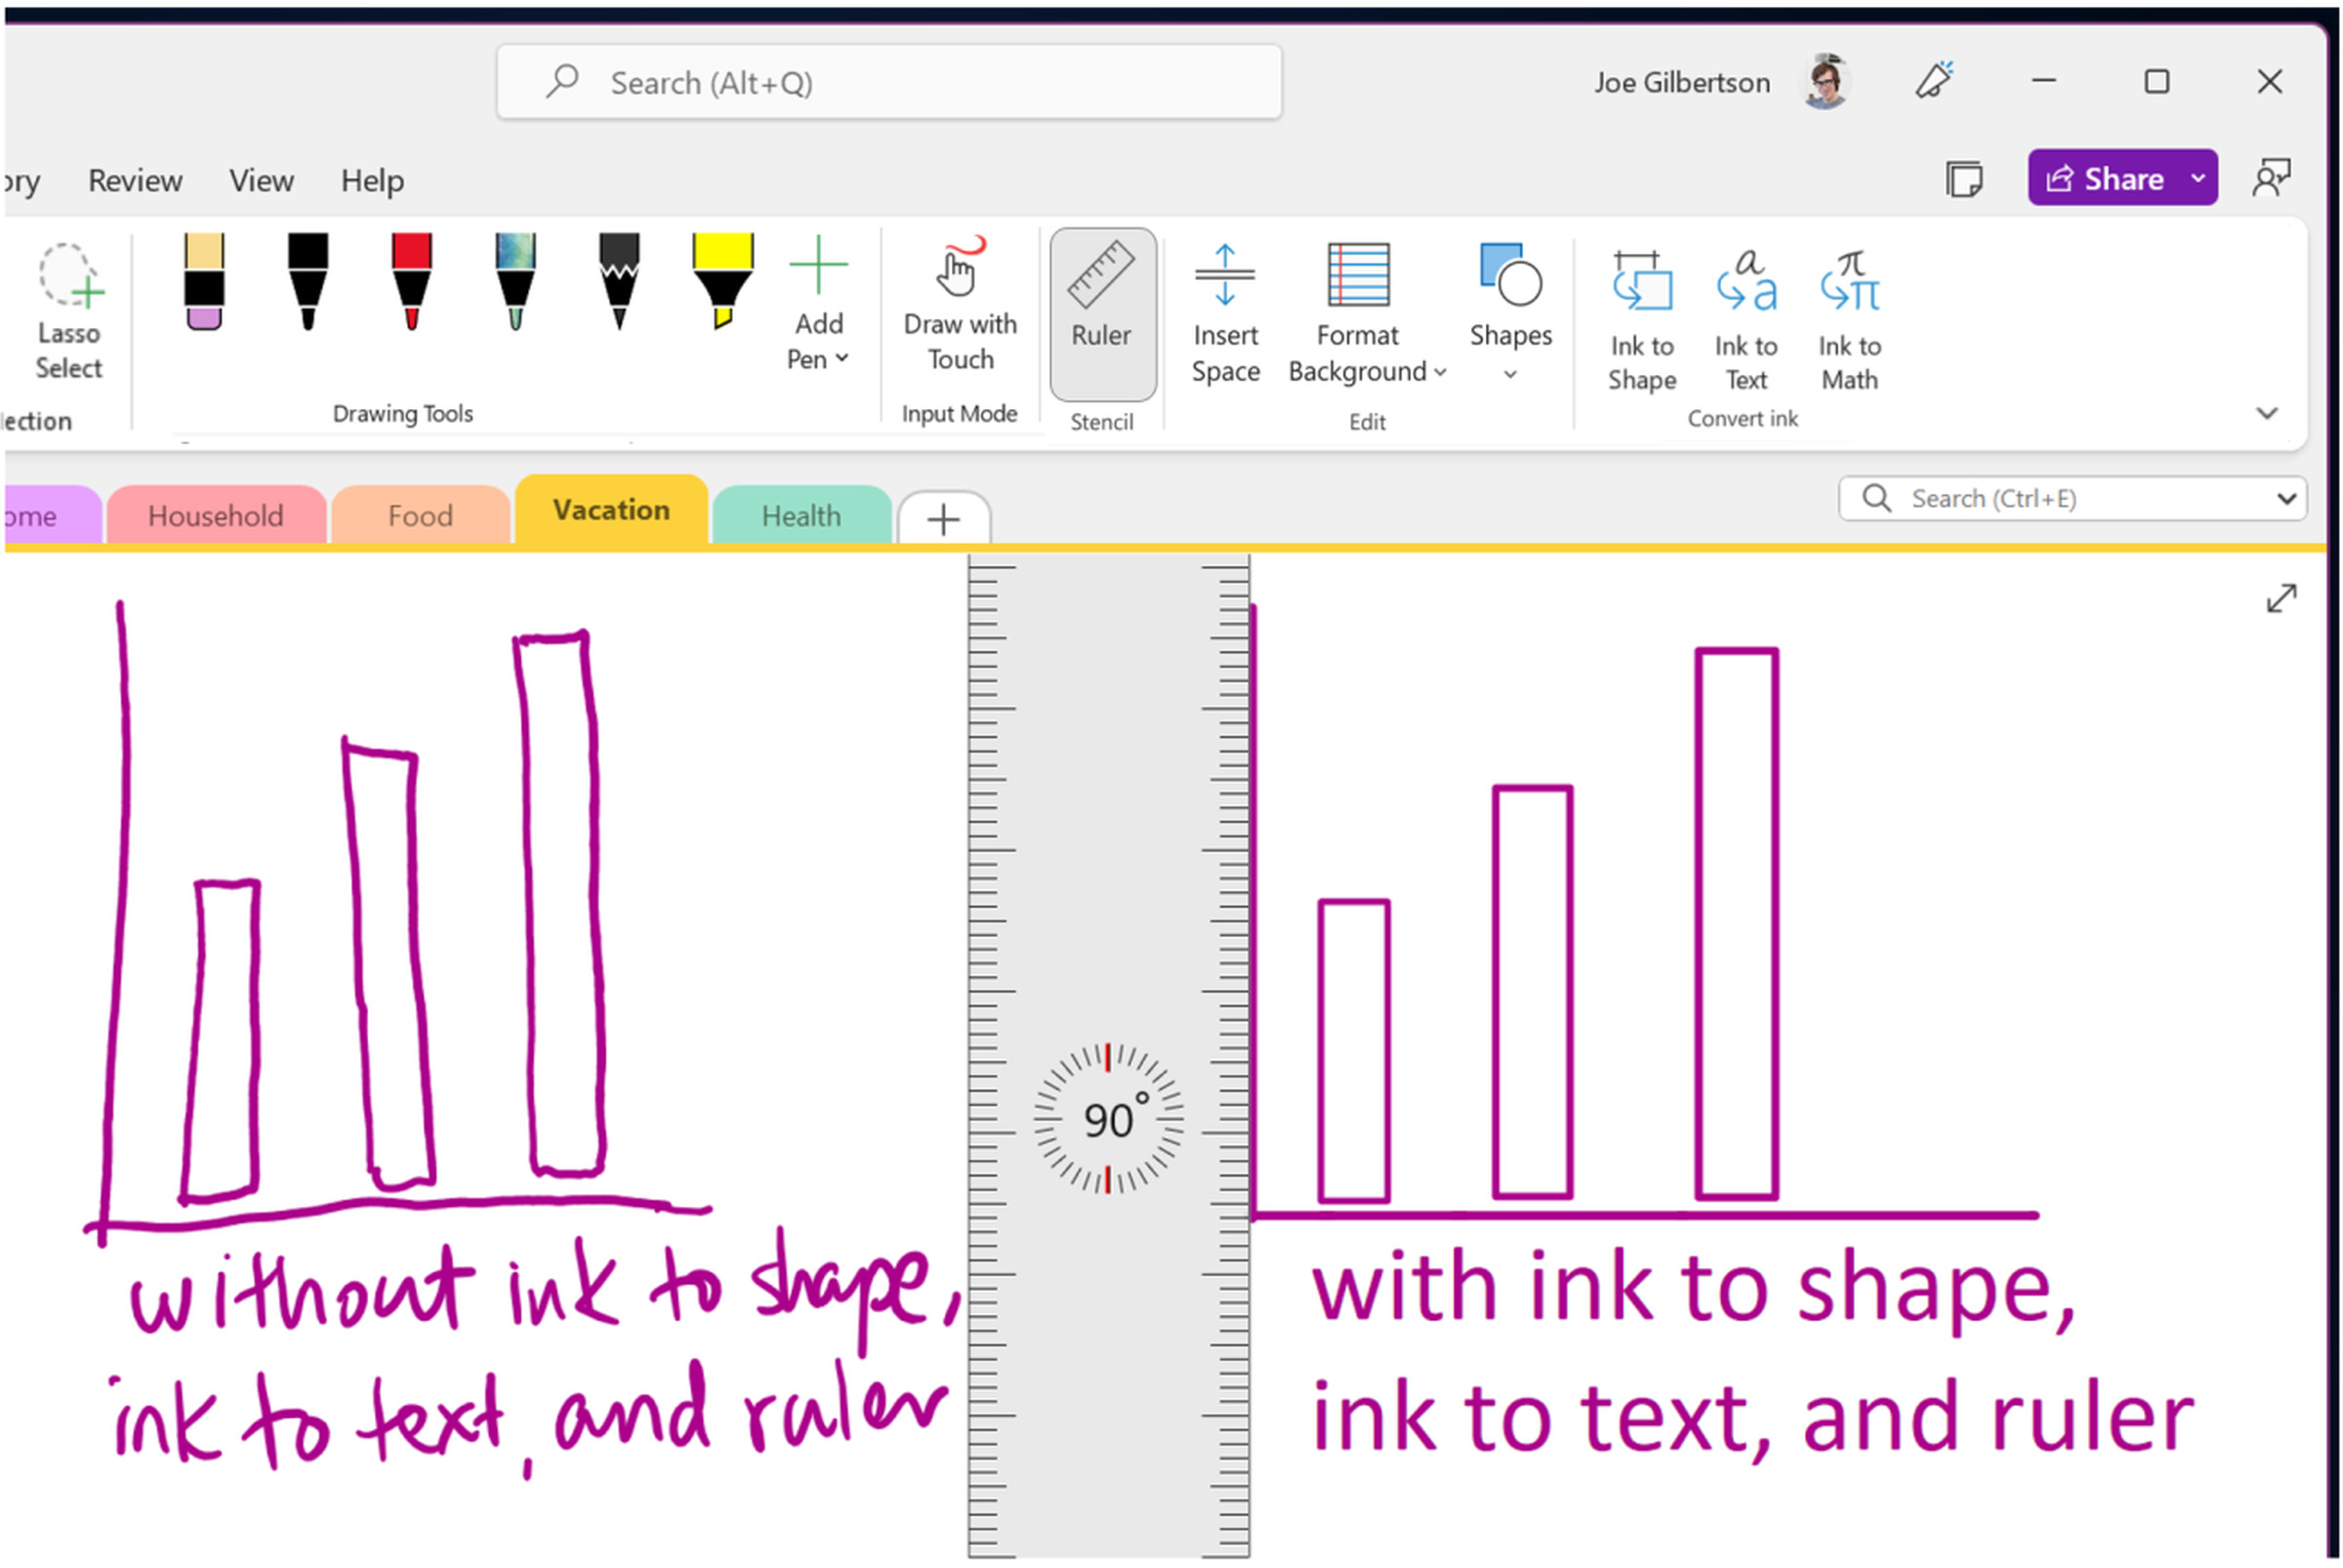 Inking is being improved in OneNote.